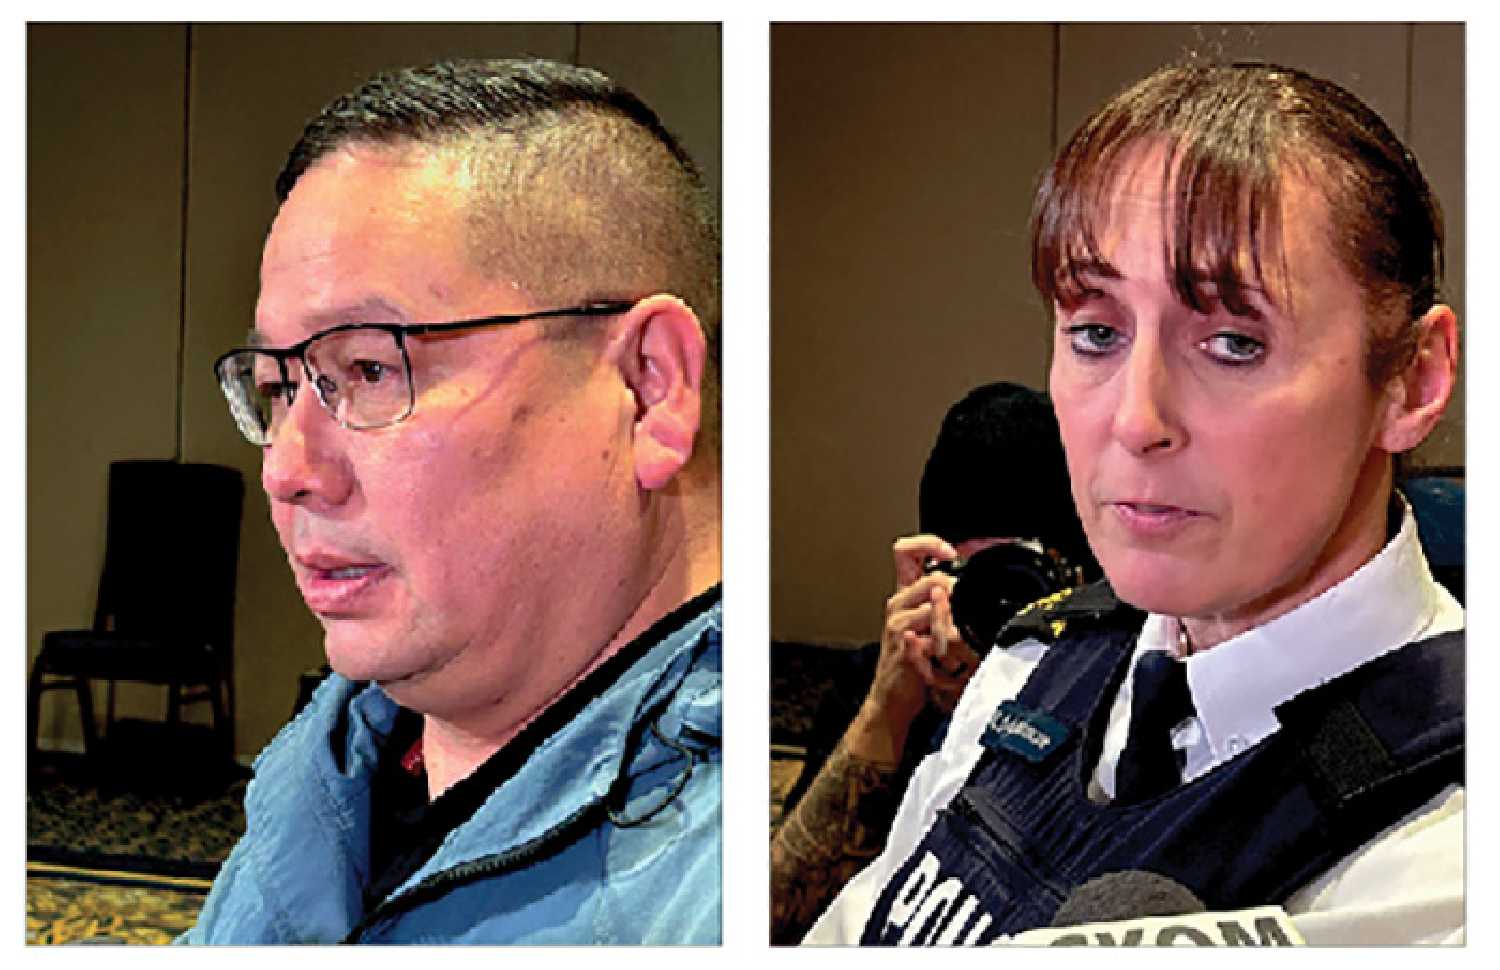 <b> Left:</b> James Smith Cree Nation Chief Wally Burns speaks with reporters after the conclusion of a four-day inquest into the death of Myles Sanderson in Saskatoon. <b> Right:</b> RCMP Assistant Commissioner Rhonda Blackmore fields questions from reporters after the inquest revealed three of four jury recommendations focused on the RCMP.